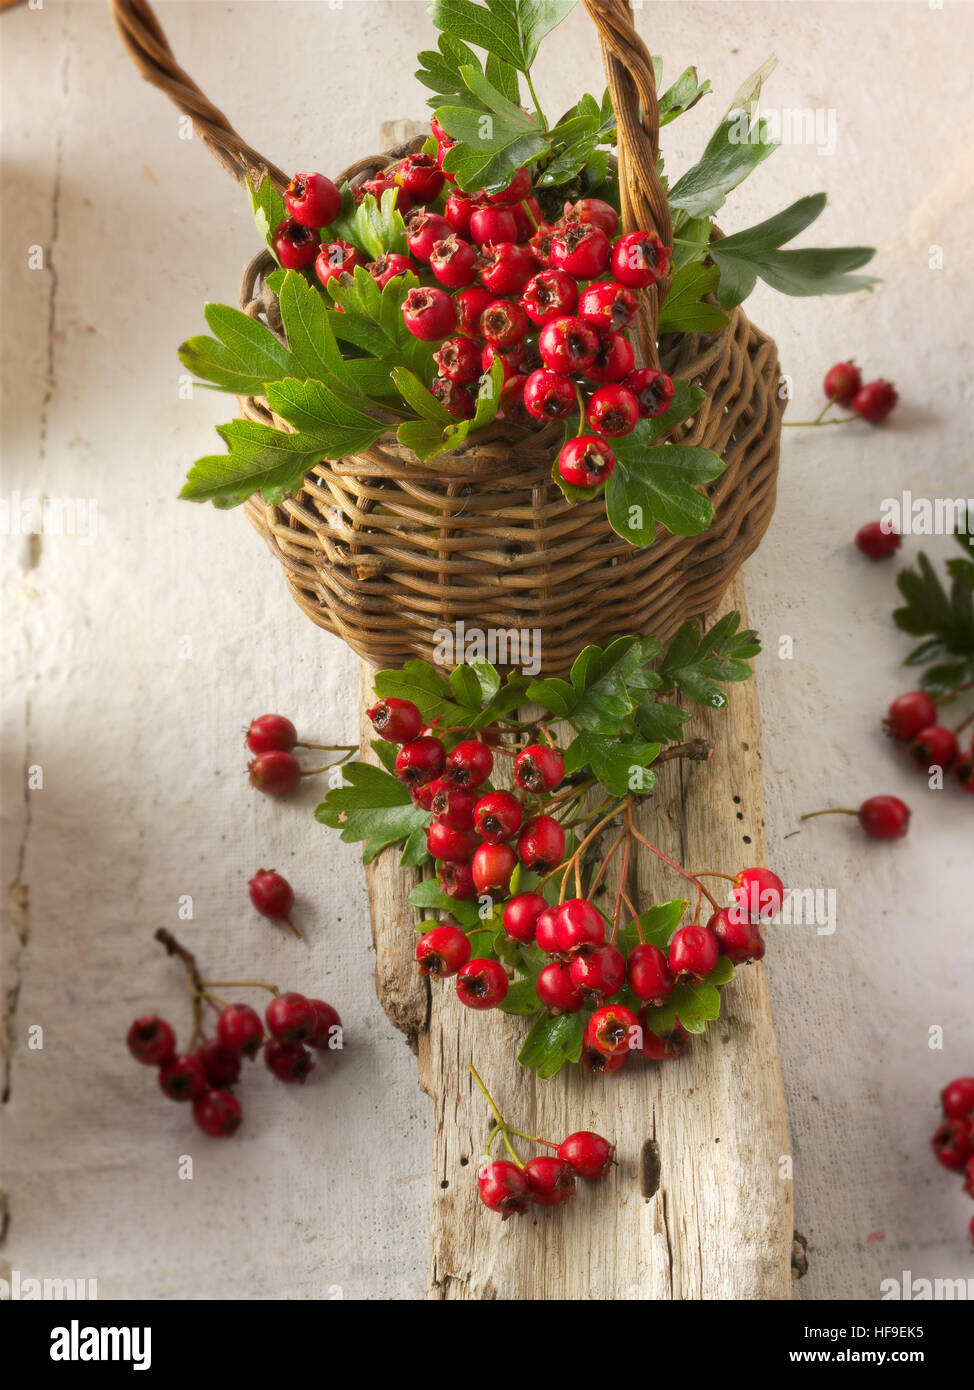 May-tree, whitethorn, or hawberry (Crataegus sp.), fresh berries and foliage in basket Stock Photo